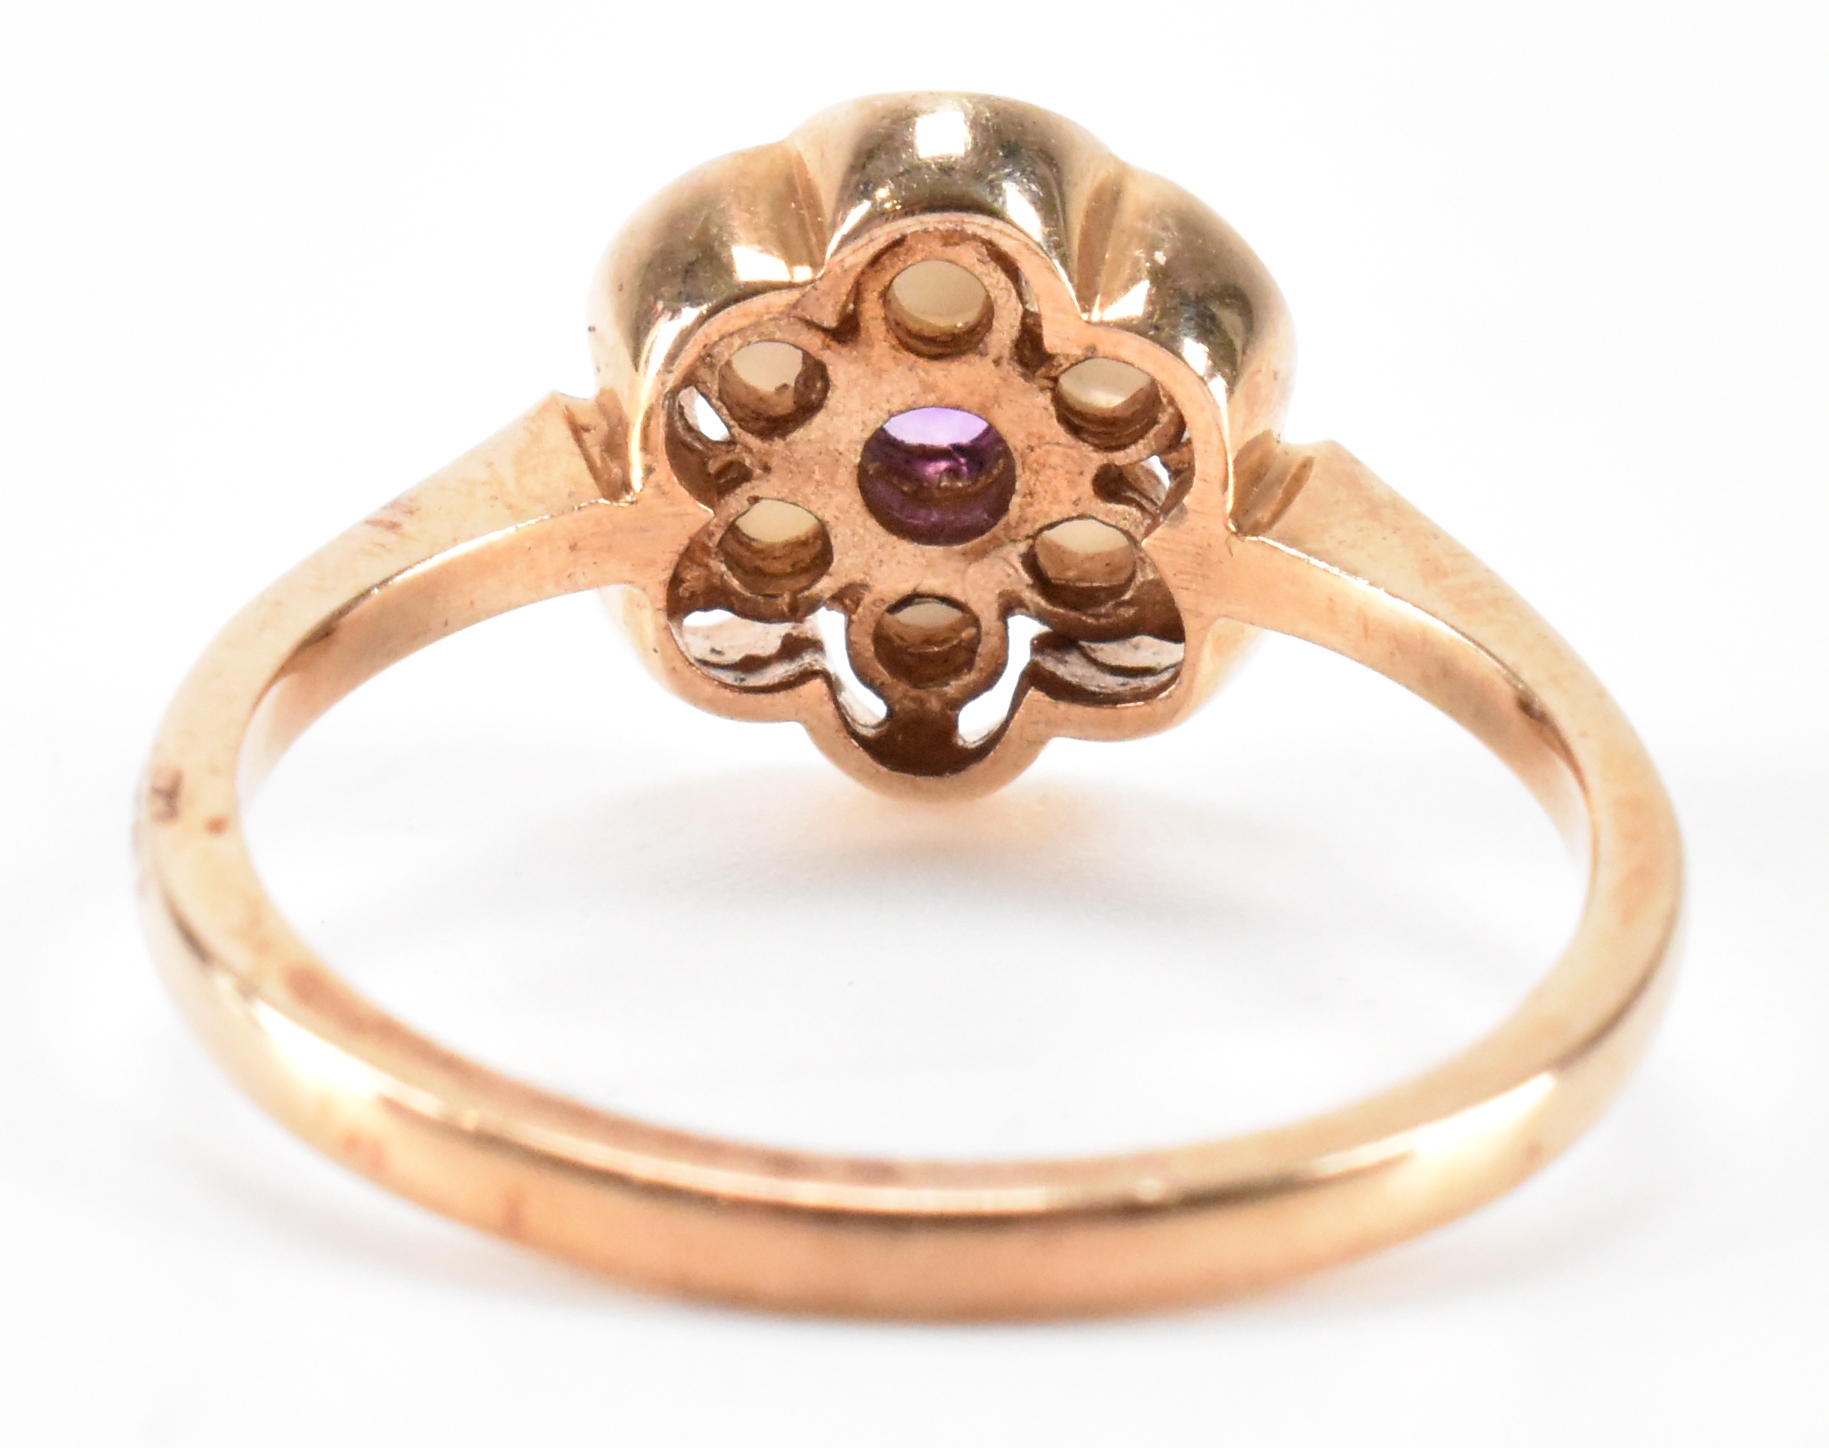 HALLMAKRED 9CT GOLD AMETHYST & SEED PEARL RING - Image 4 of 6